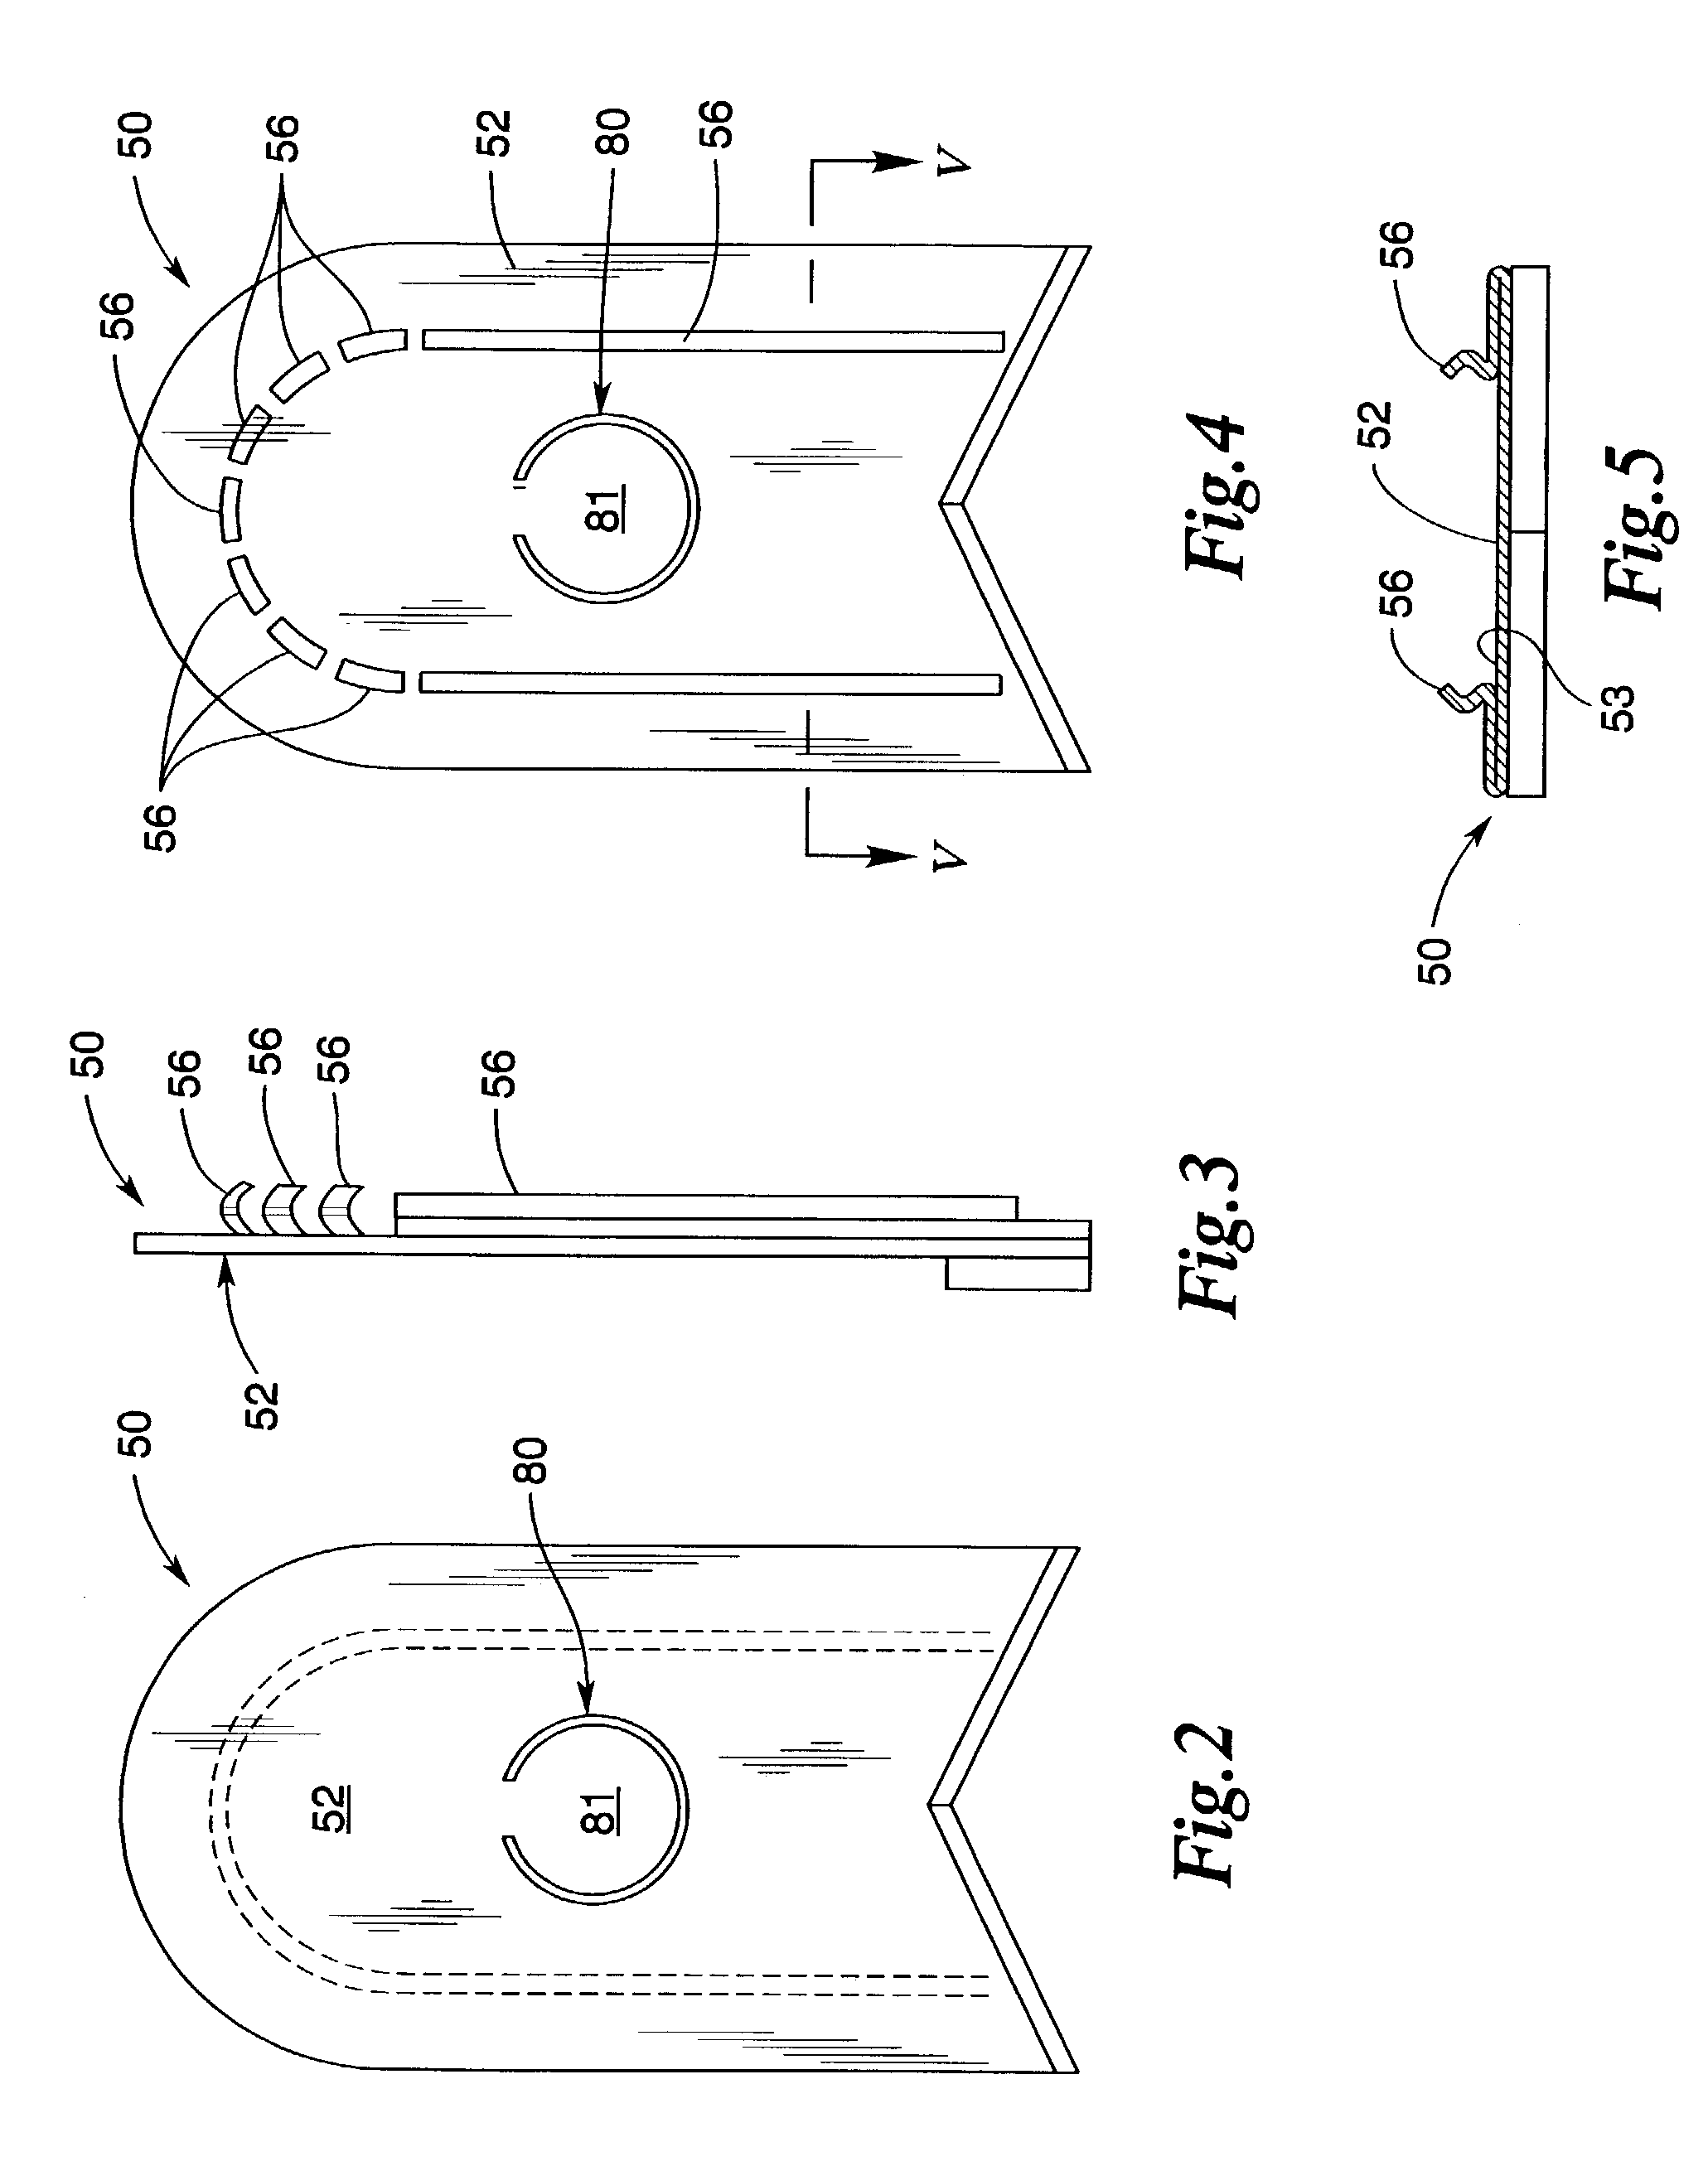 Spacer bar retainers and methods for retaining spacer bars in metal wall studs